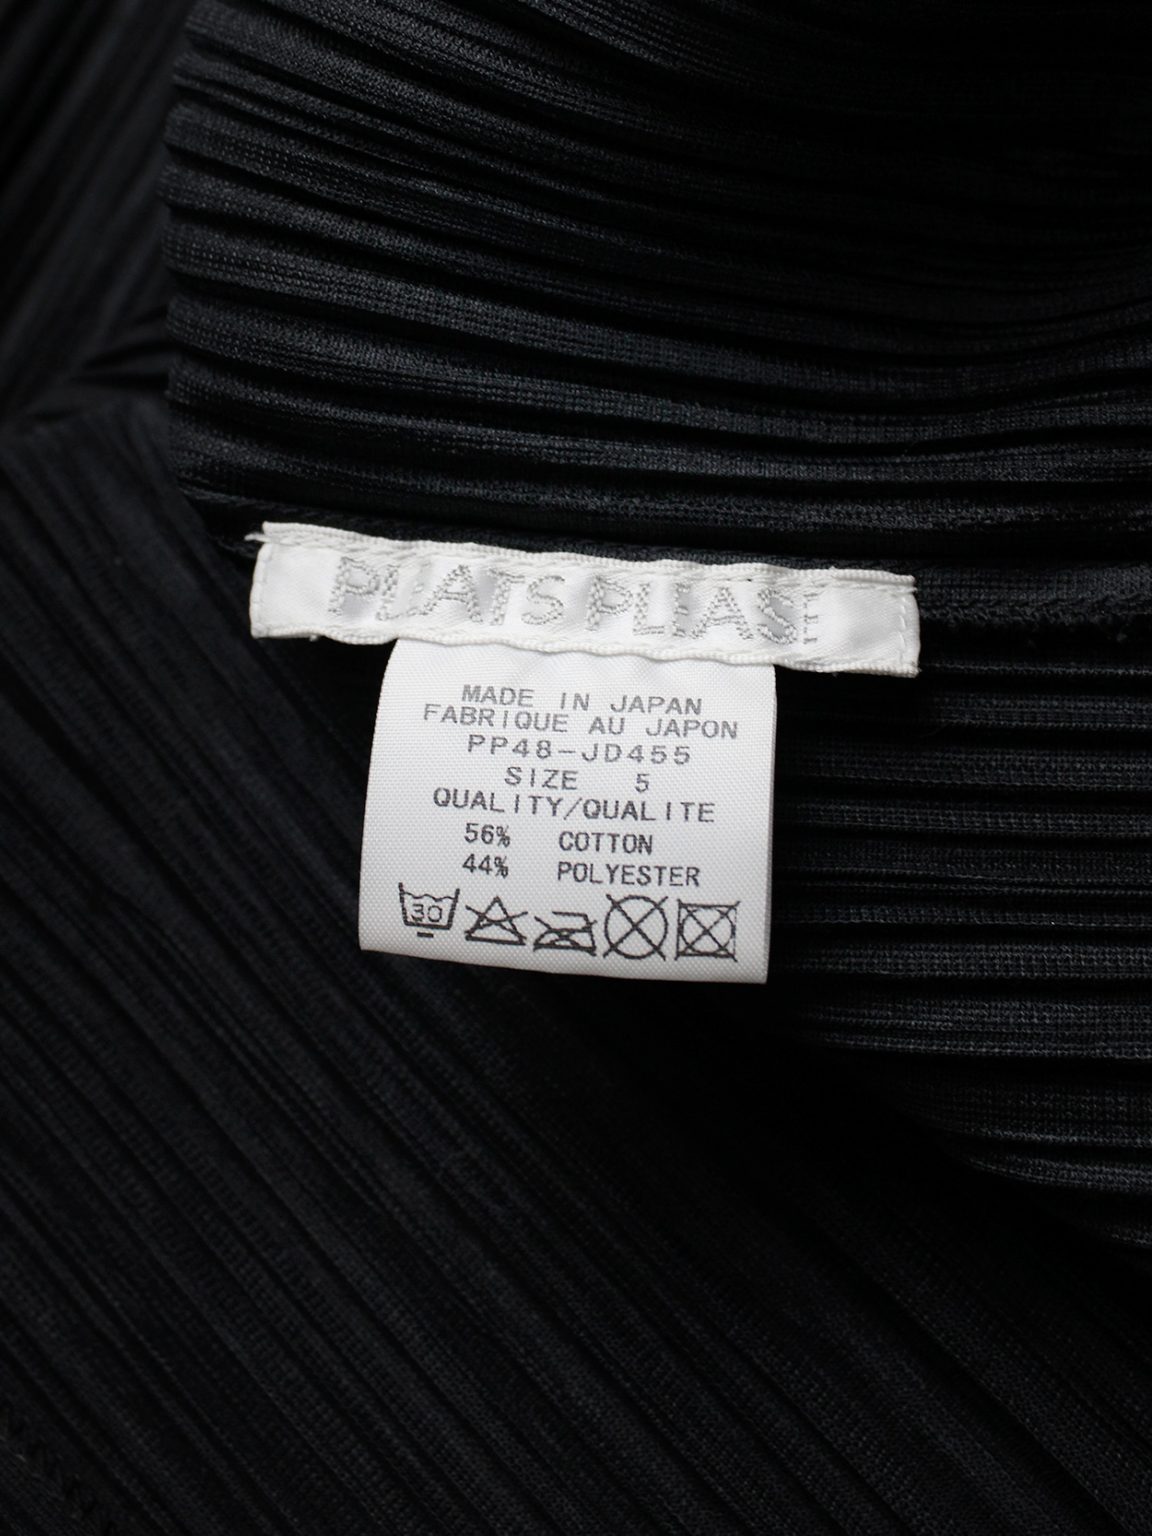 Issey Miyake Pleats Please black pleated cardigan with lapels and tie-front